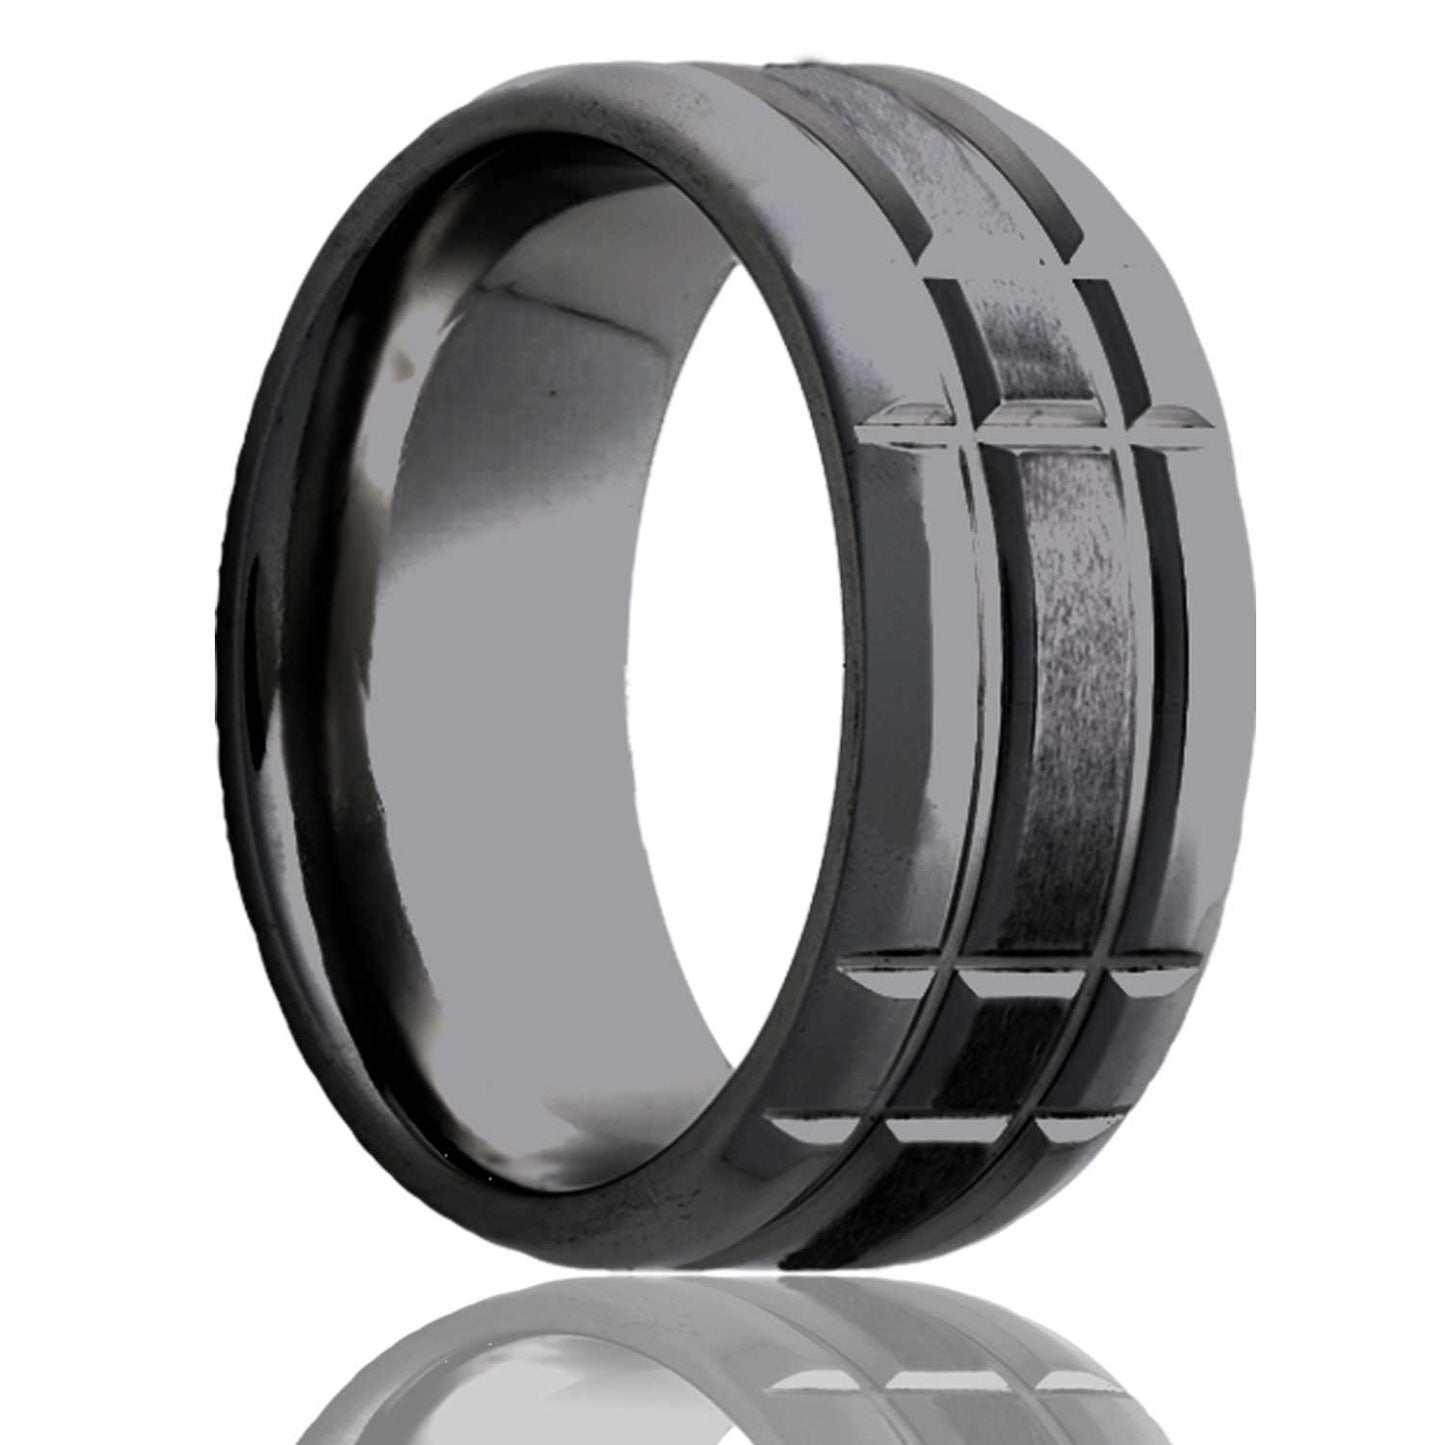 A intersecting grooves satin finish zirconium men's wedding band with beveled edges displayed on a neutral white background.